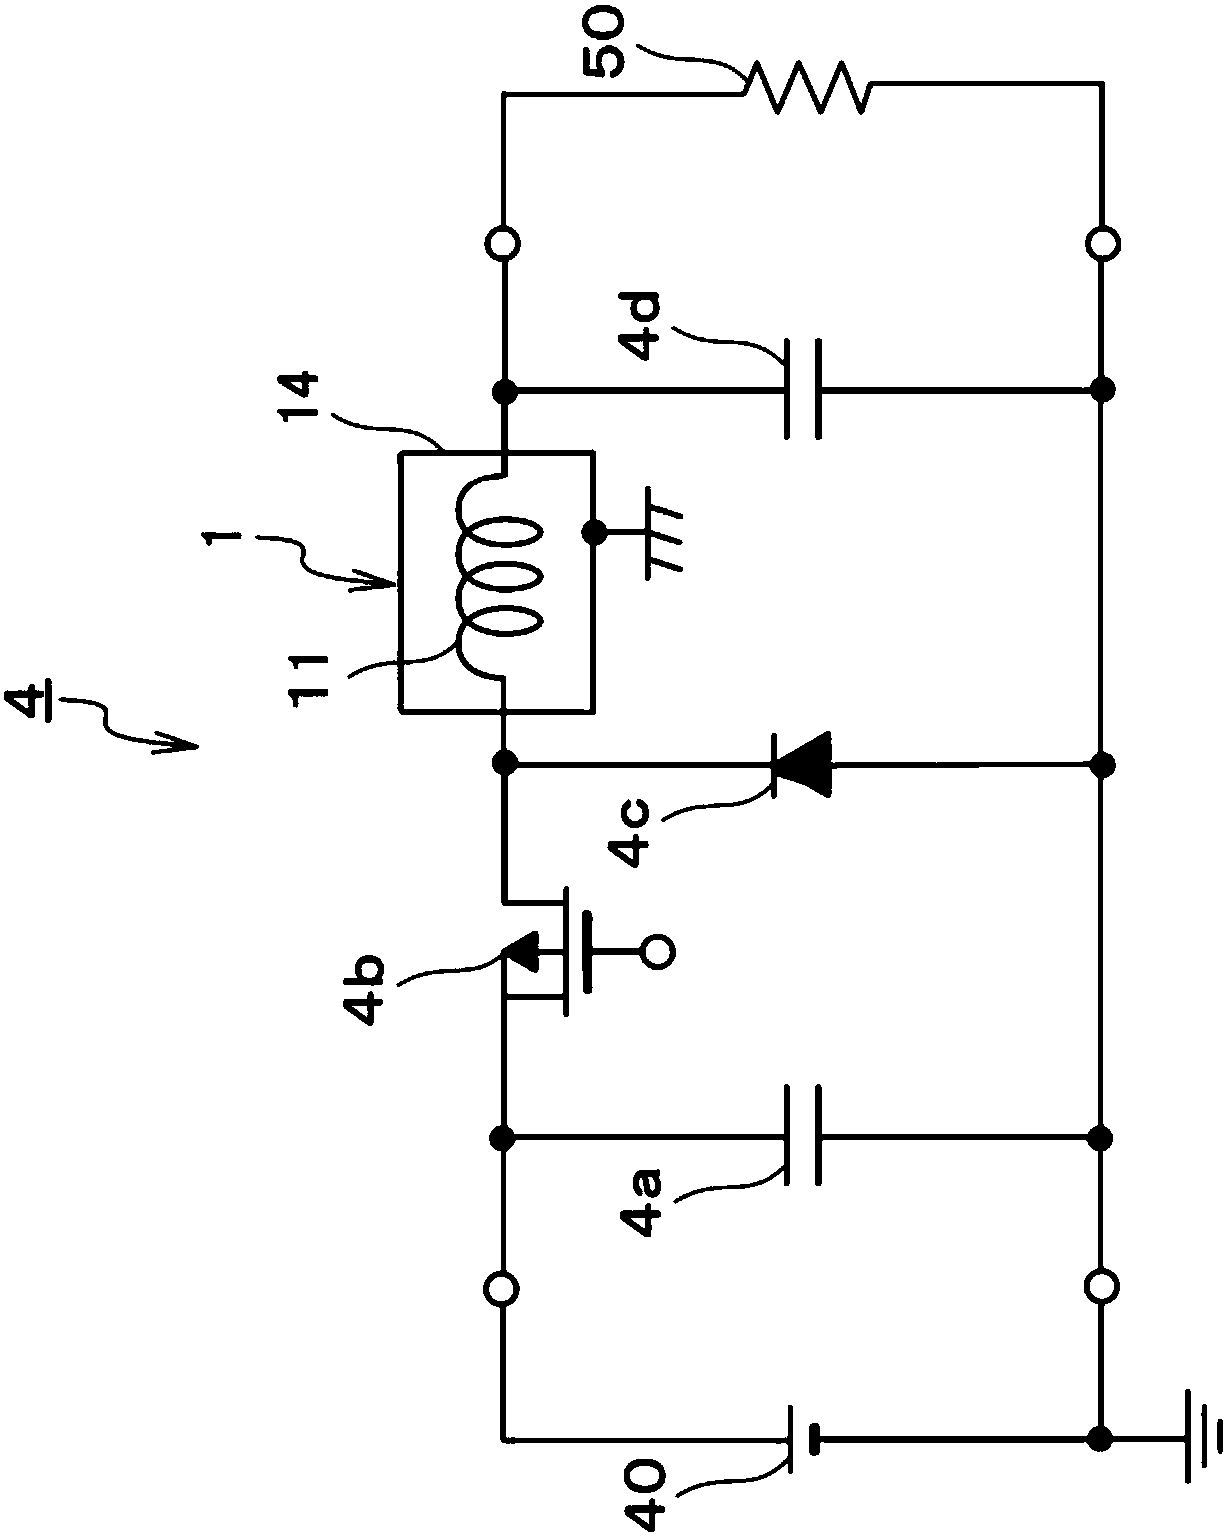 Inductor and DC-DC converter